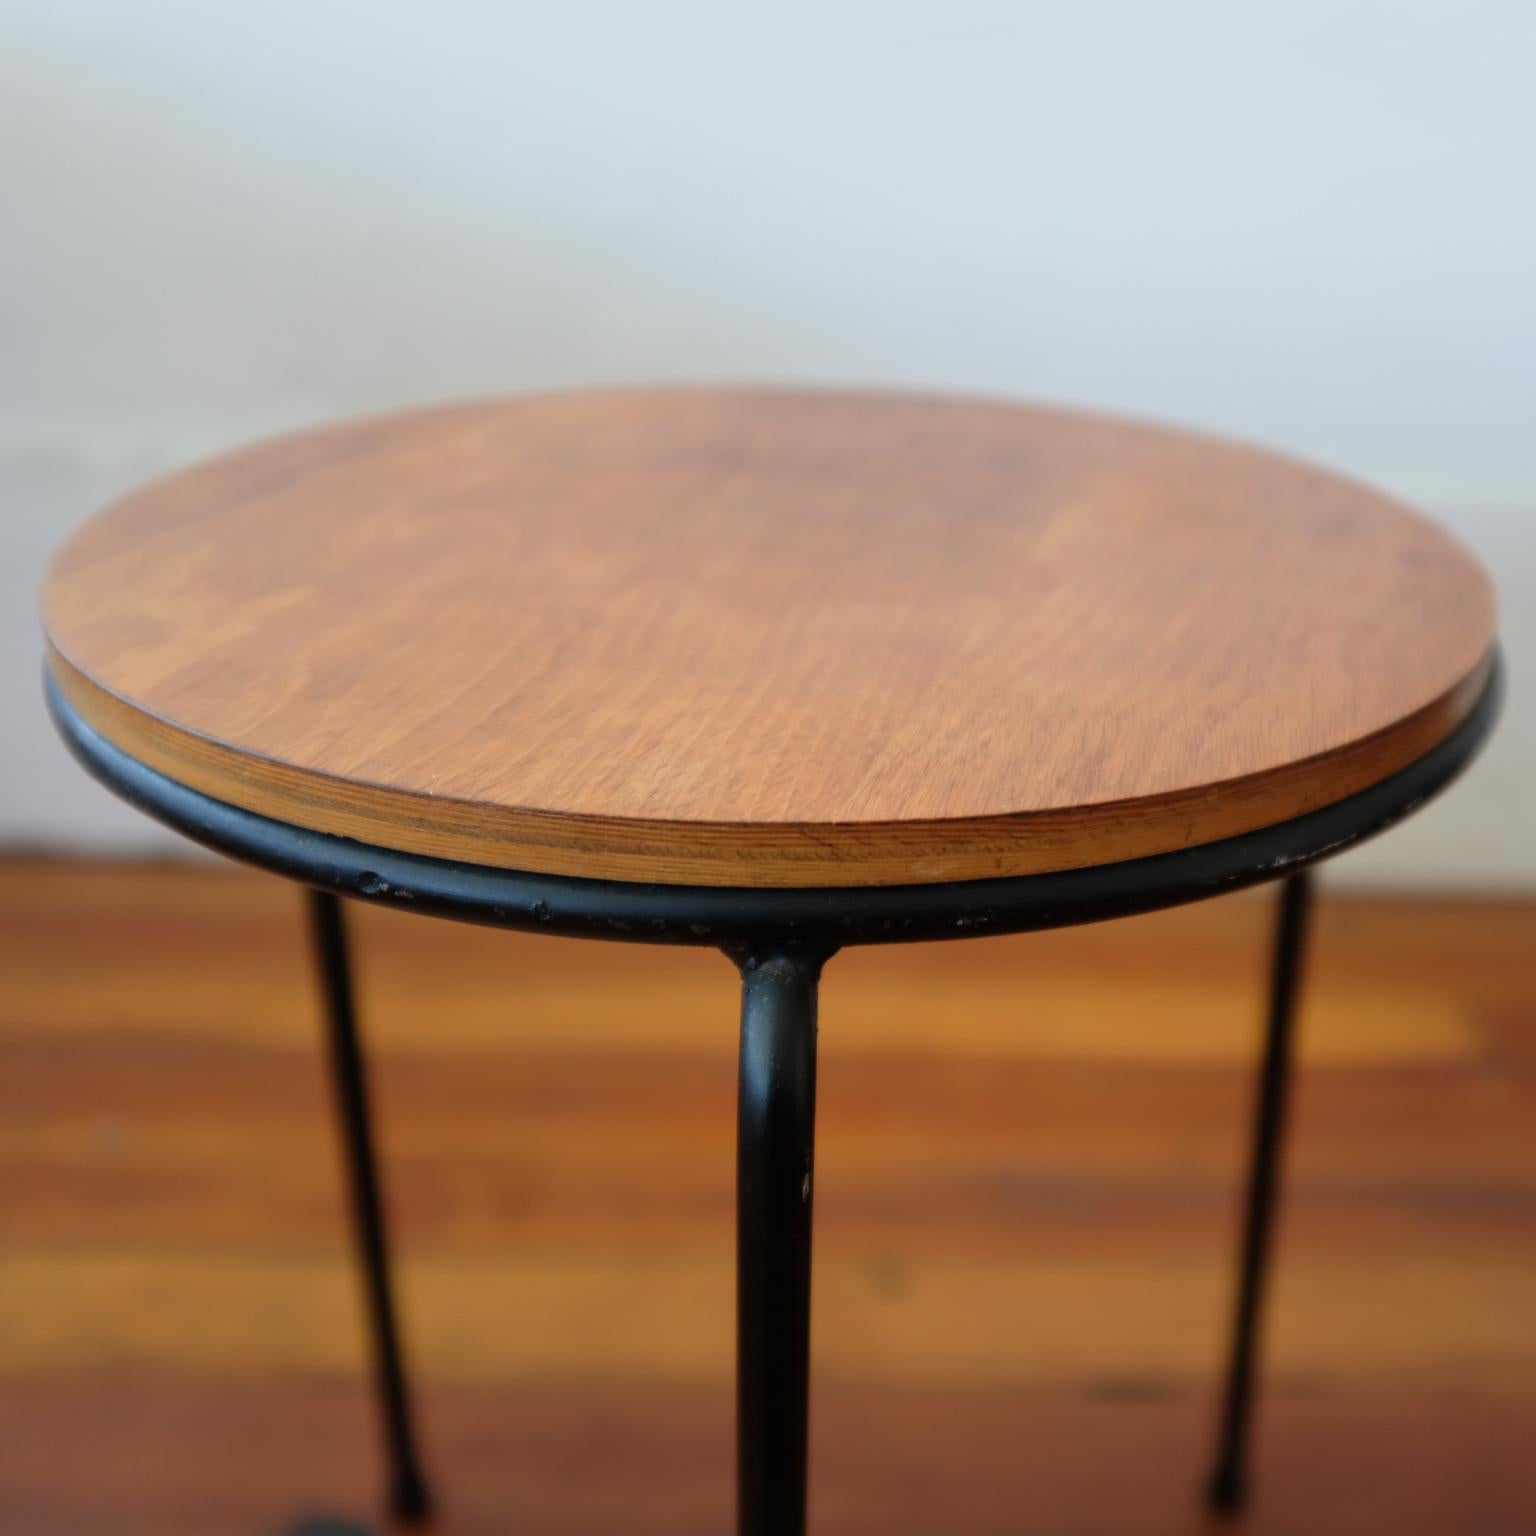 Pair of Iron and Walnut Tables or Stools, 1950s For Sale 2